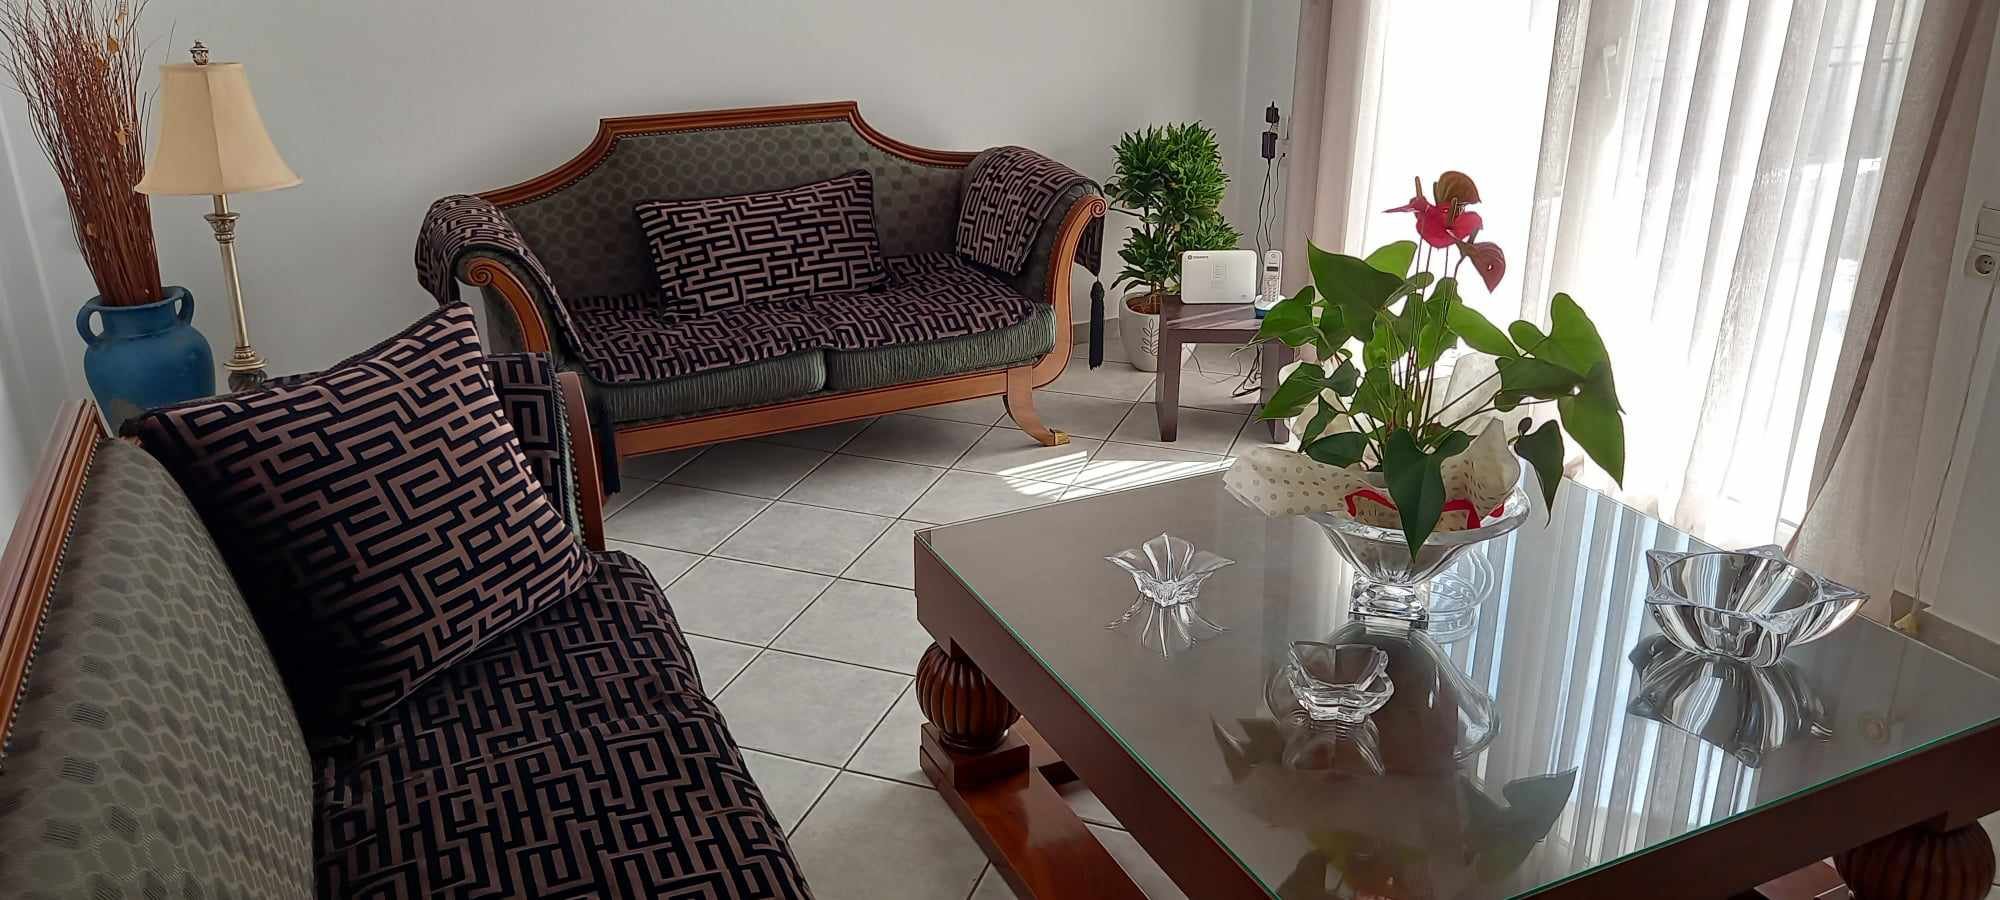 unique_spacious_modern_home_couch_table_tiles.jpg